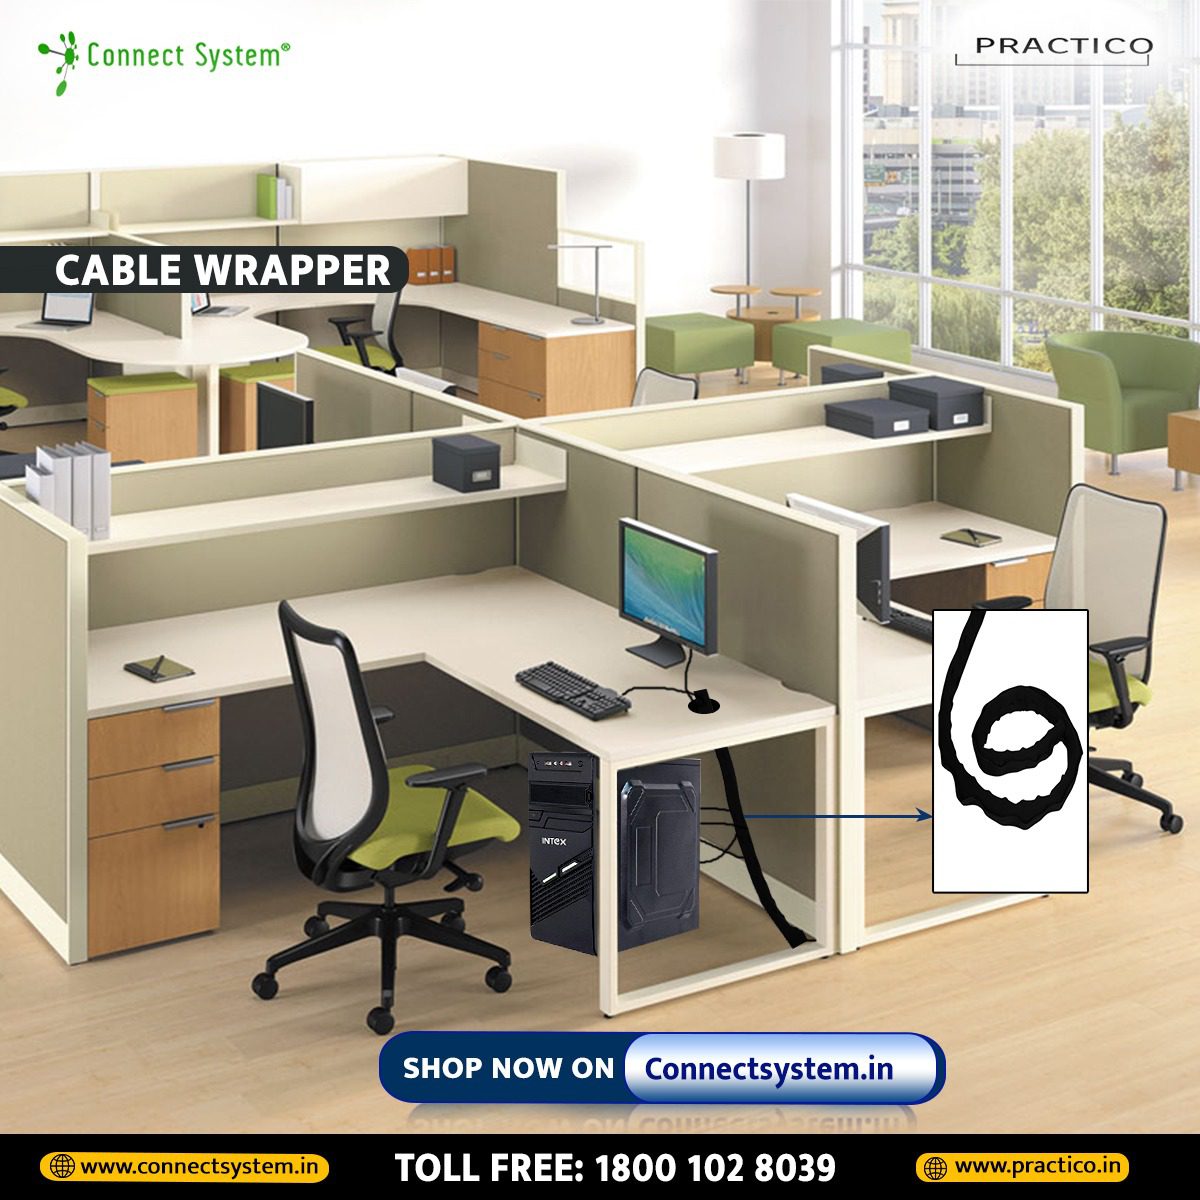 Cable Wrapper